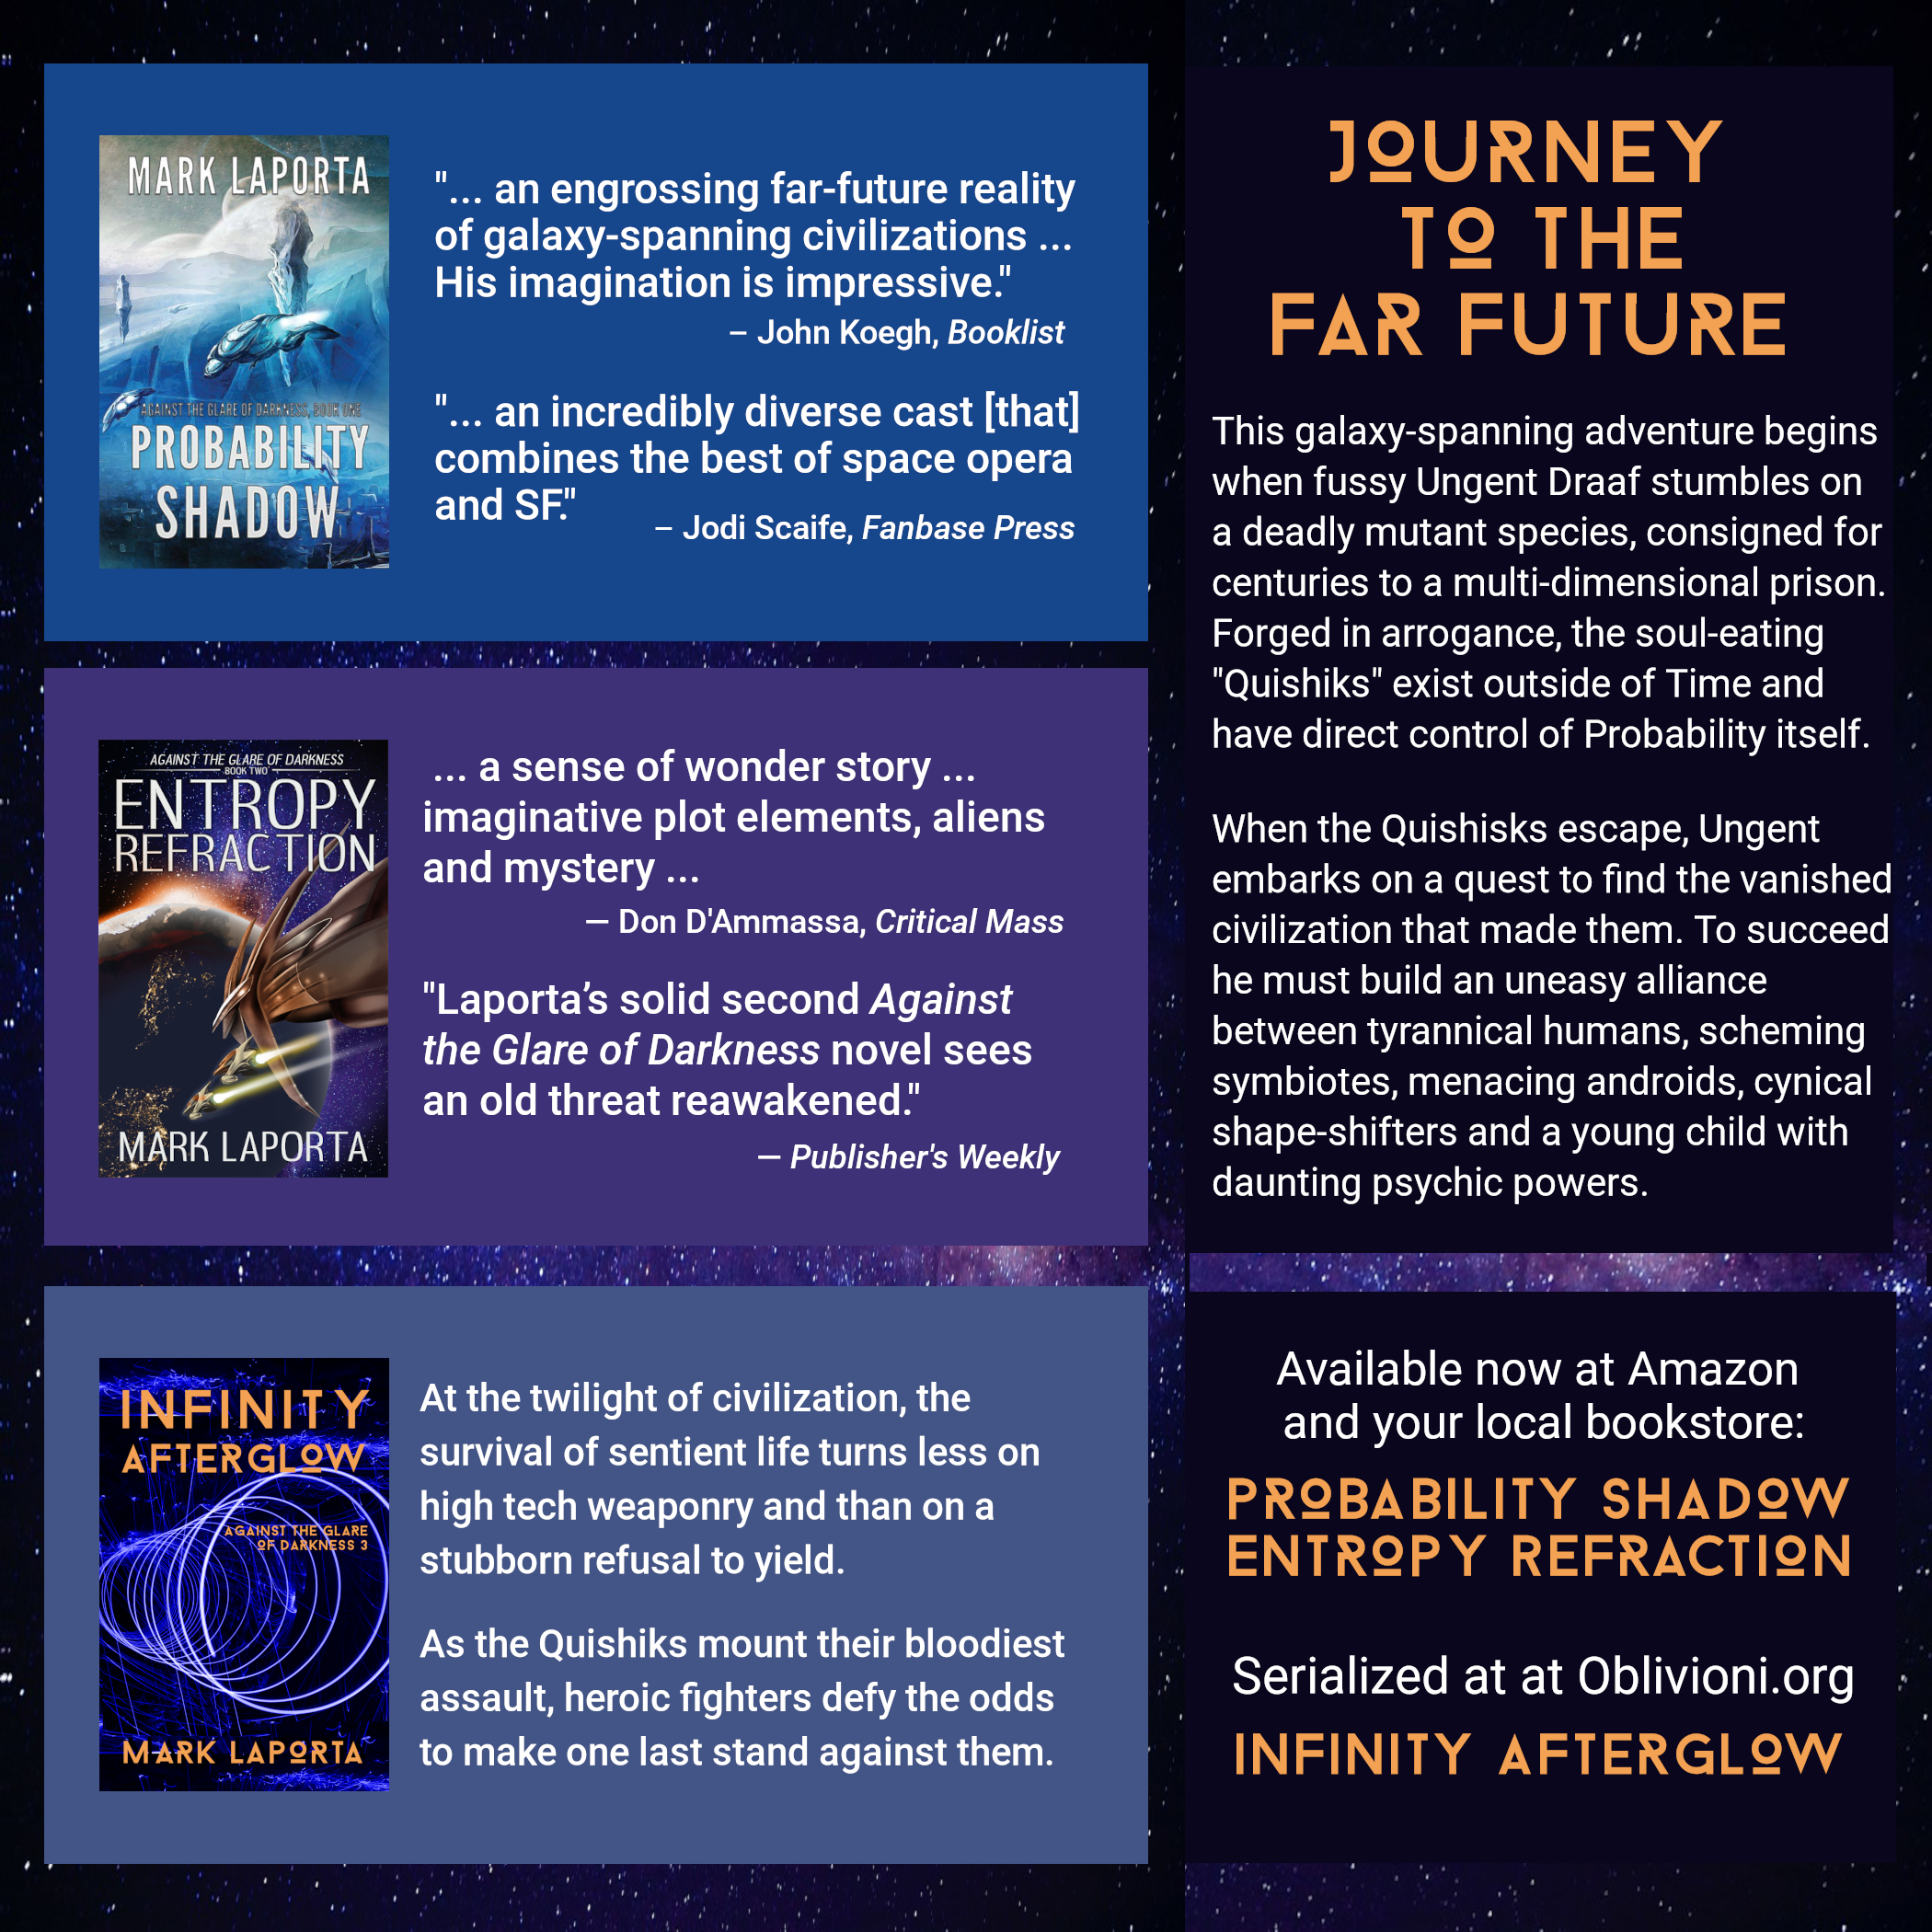 SRL Ae AT 5

La

wv? # “ 4
VLG LAPORTA

ALISTER

 

MARK LAPORTA

“... an engrossing far-future reality
of galaxy-spanning civilizations ...
His imagination is impressive."

— John Koegh, Booklist

"... an incredibly diverse cast [that]
combines the best of space opera
and SF’

— Jodi Scaife, Fanbase Press

... a sense of wonder story ...
imaginative plot elements, aliens
and mystery ...

— Don D'Ammassa, Critical Mass

“Laporta’s solid second Against
the Glare of Darkness novel sees
an old threat reawakened.'

— Publisher's Weekly

At the twilight of civilization, the
survival of sentient life turns less on
high tech weaponry and than on a
stubborn refusal to yield.

As the Quishiks mount their bloodiest
assault, heroic fighters defy the odds
to make one last stand against them.

JOURNEY
TQ THE
FAR FUTURE

This galaxy-spanning adventure begins
when fussy Ungent Draaf stumbles on
a deadly mutant species, consigned for
centuries to a multi-dimensional prison.
Forged in arrogance, the soul-eating
"Quishiks" exist outside of Time and
have direct control of Probability itself.

When the Quishisks escape, Ungent
embarks on a quest to find the vanished -
civilization that made them. To succeed
he must build an uneasy alliance
between tyrannical humans, scheming
symbiotes, menacing androids, cynical
shape-shifters and a young child with
daunting psychic powers.

Available now at Amazon
and your local bookstore:

PROBABILITY SHADOW
ENTROPY REFRACTICN

Serialized at at Oblivioni.org
INFINITY AFTERGLOW